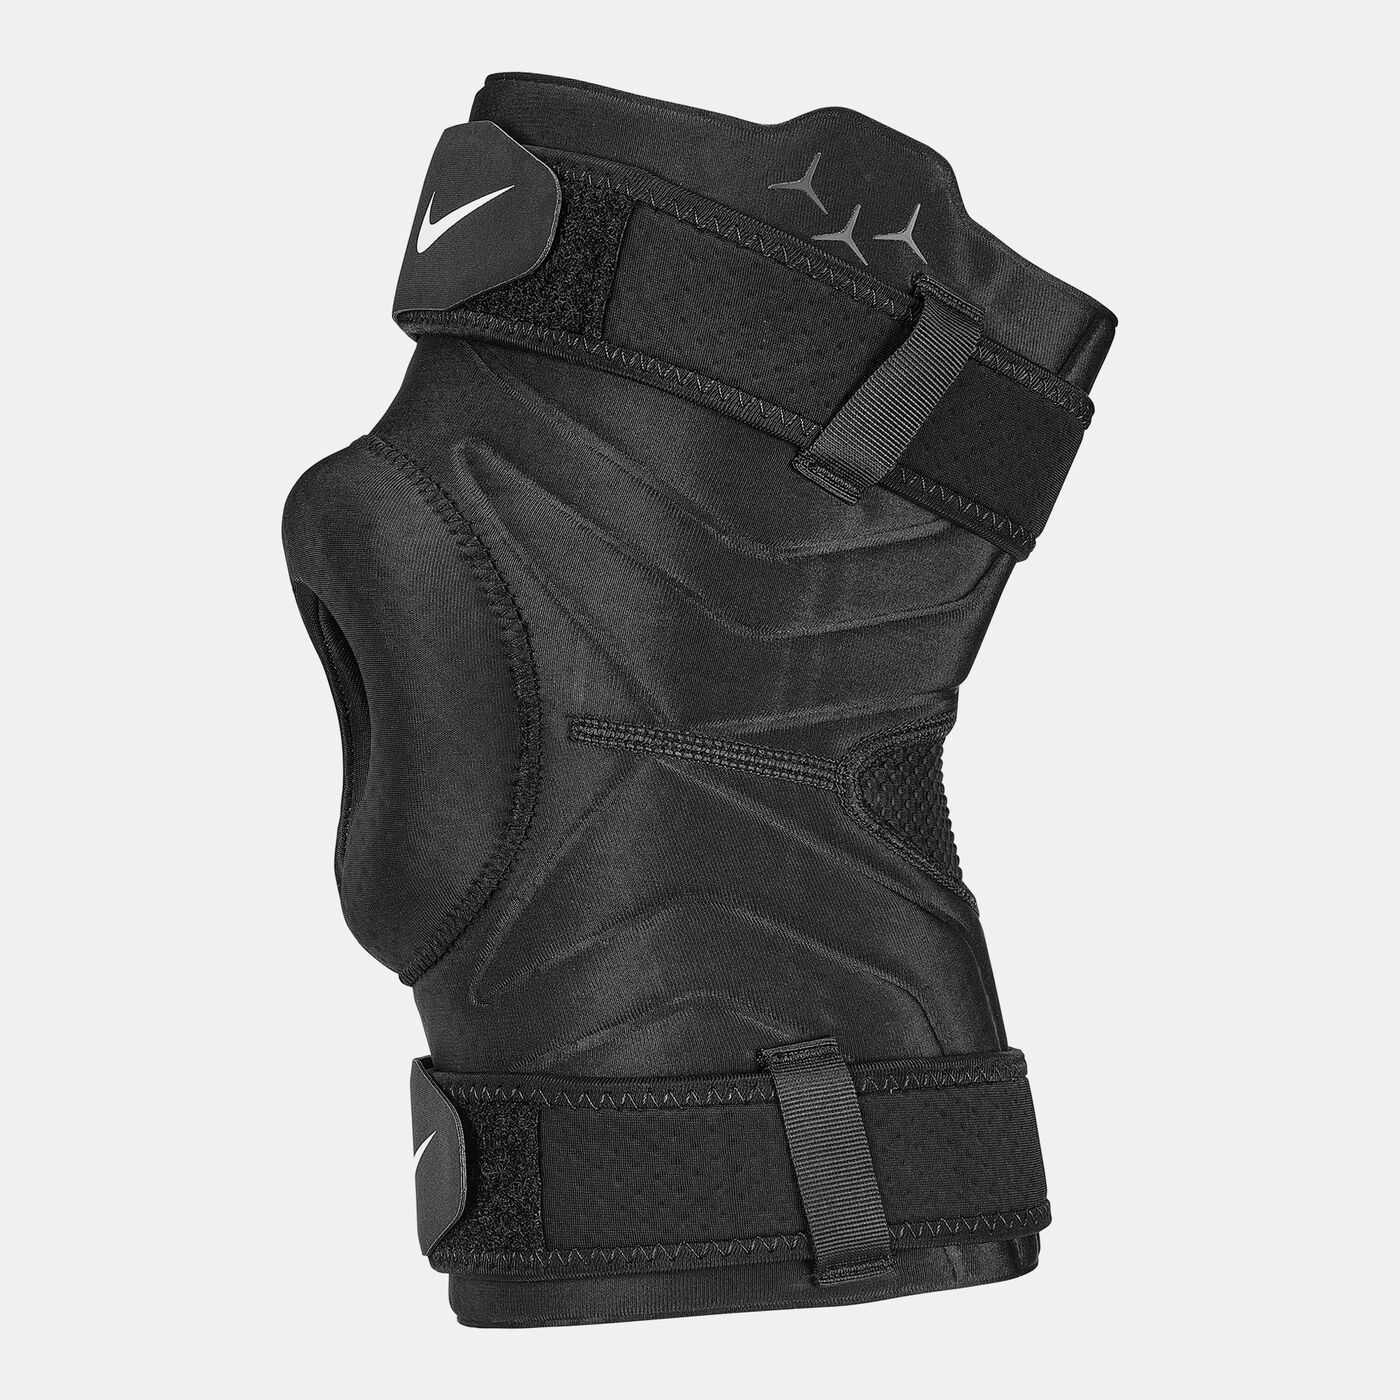 Pro Open Knee Sleeve With Strap